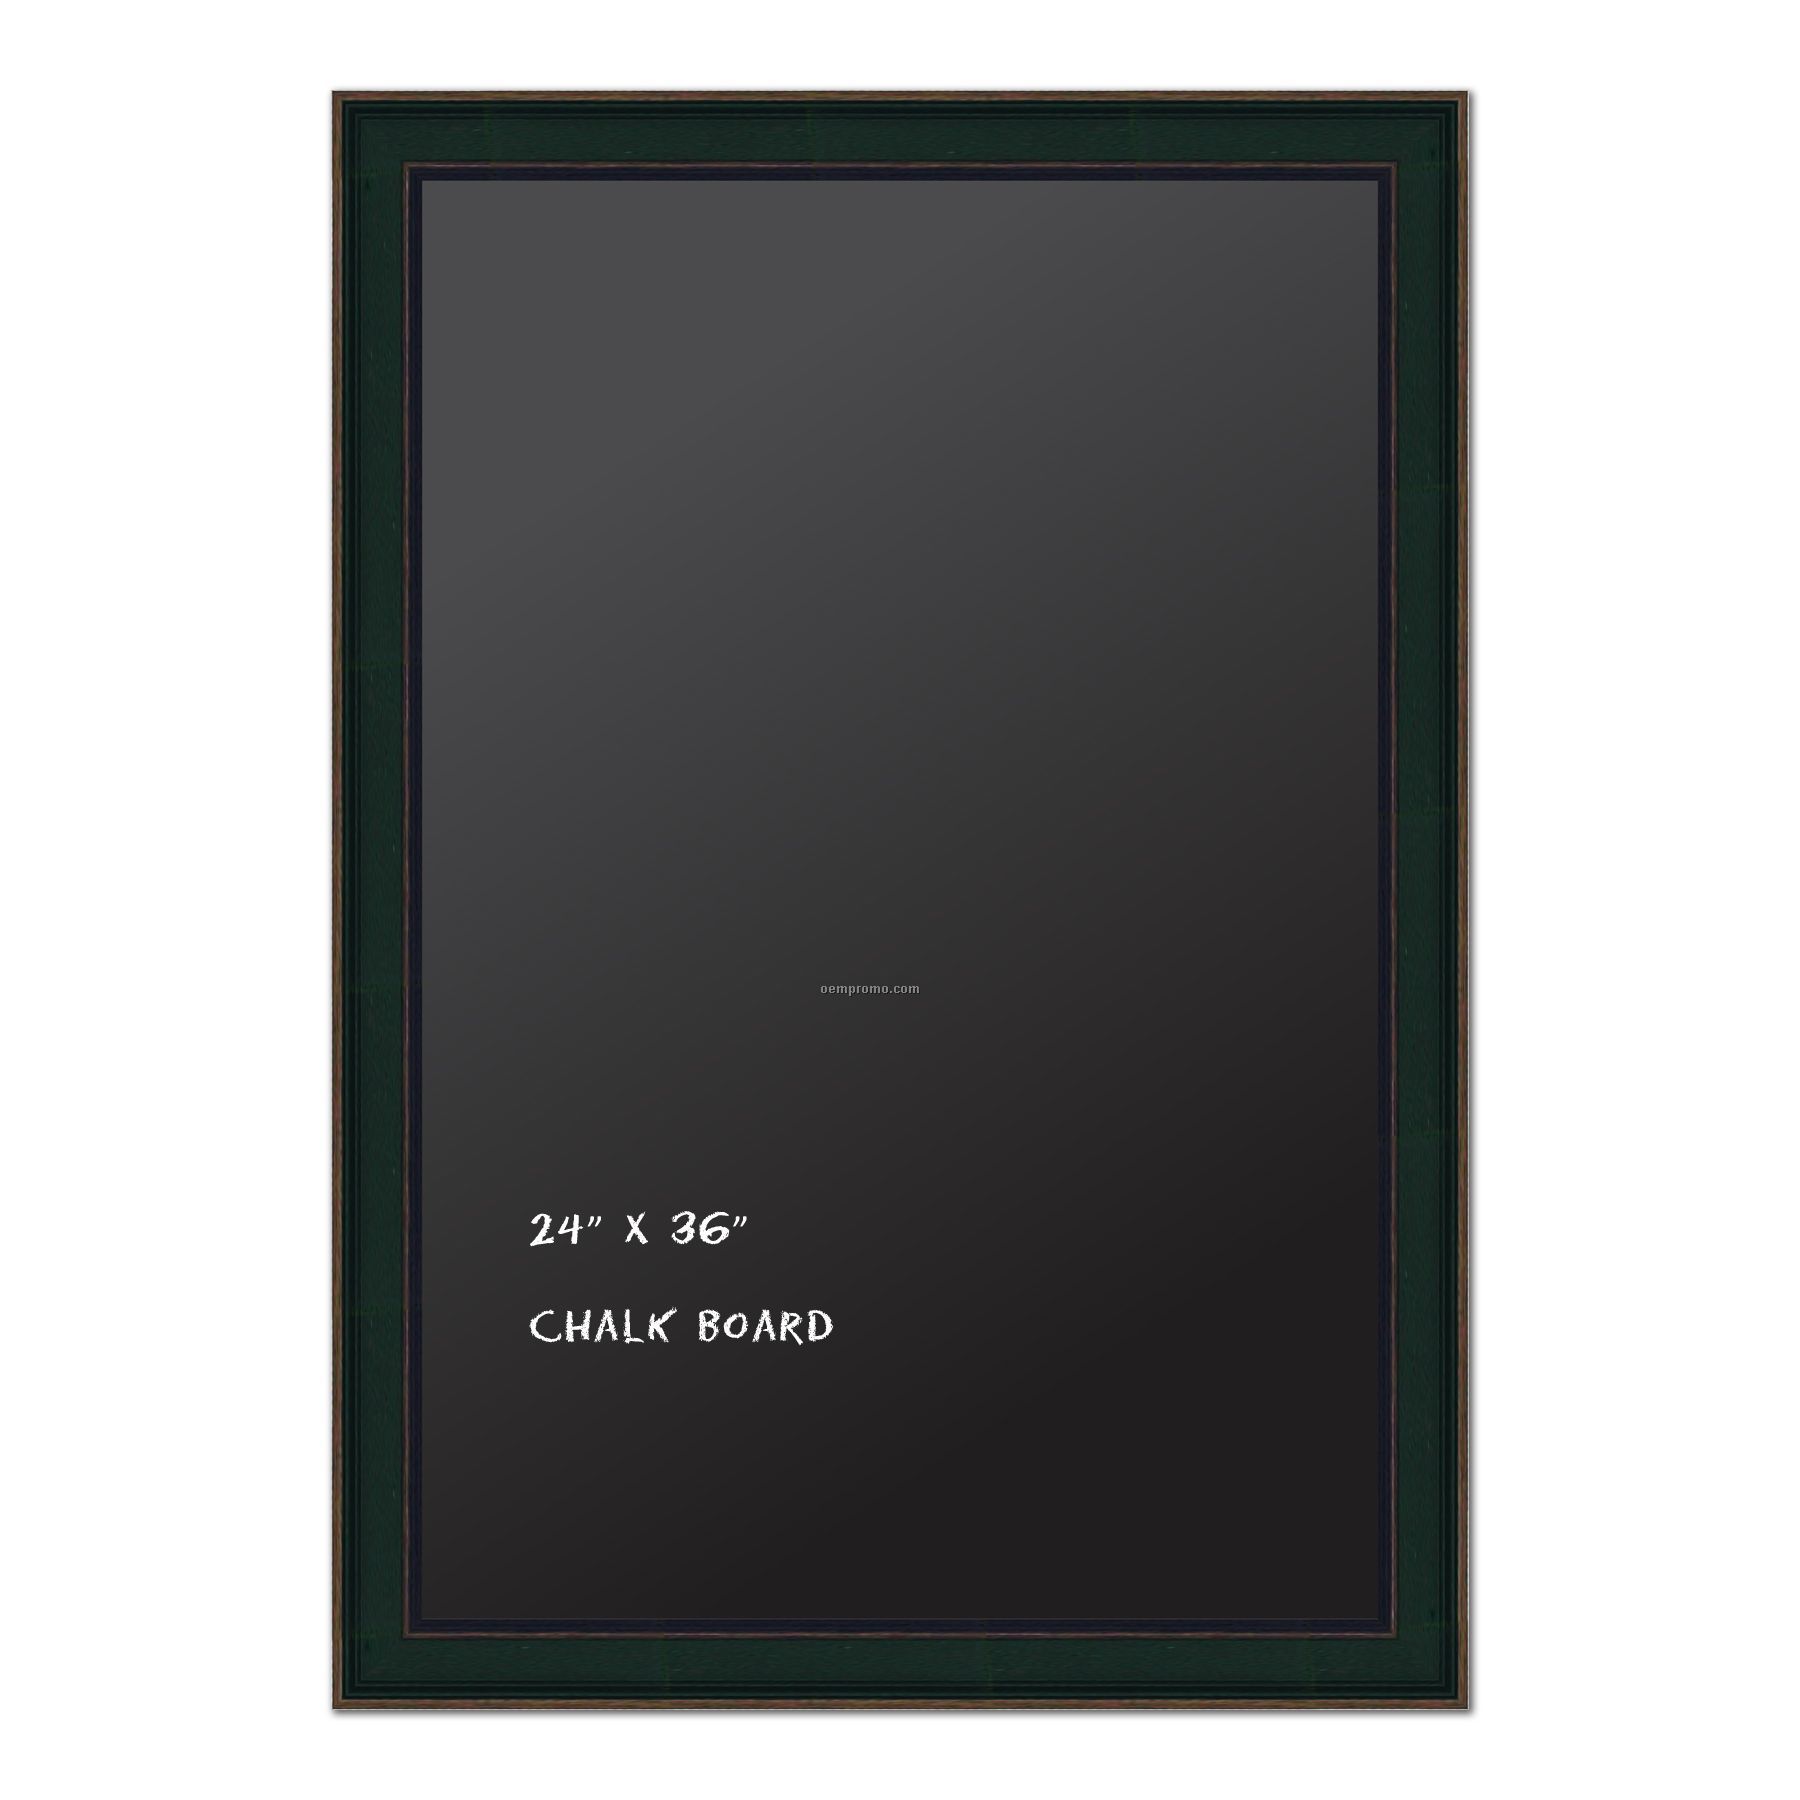 Chalk Board 24" X 36". Real Wood Frame - Country Green Finish.